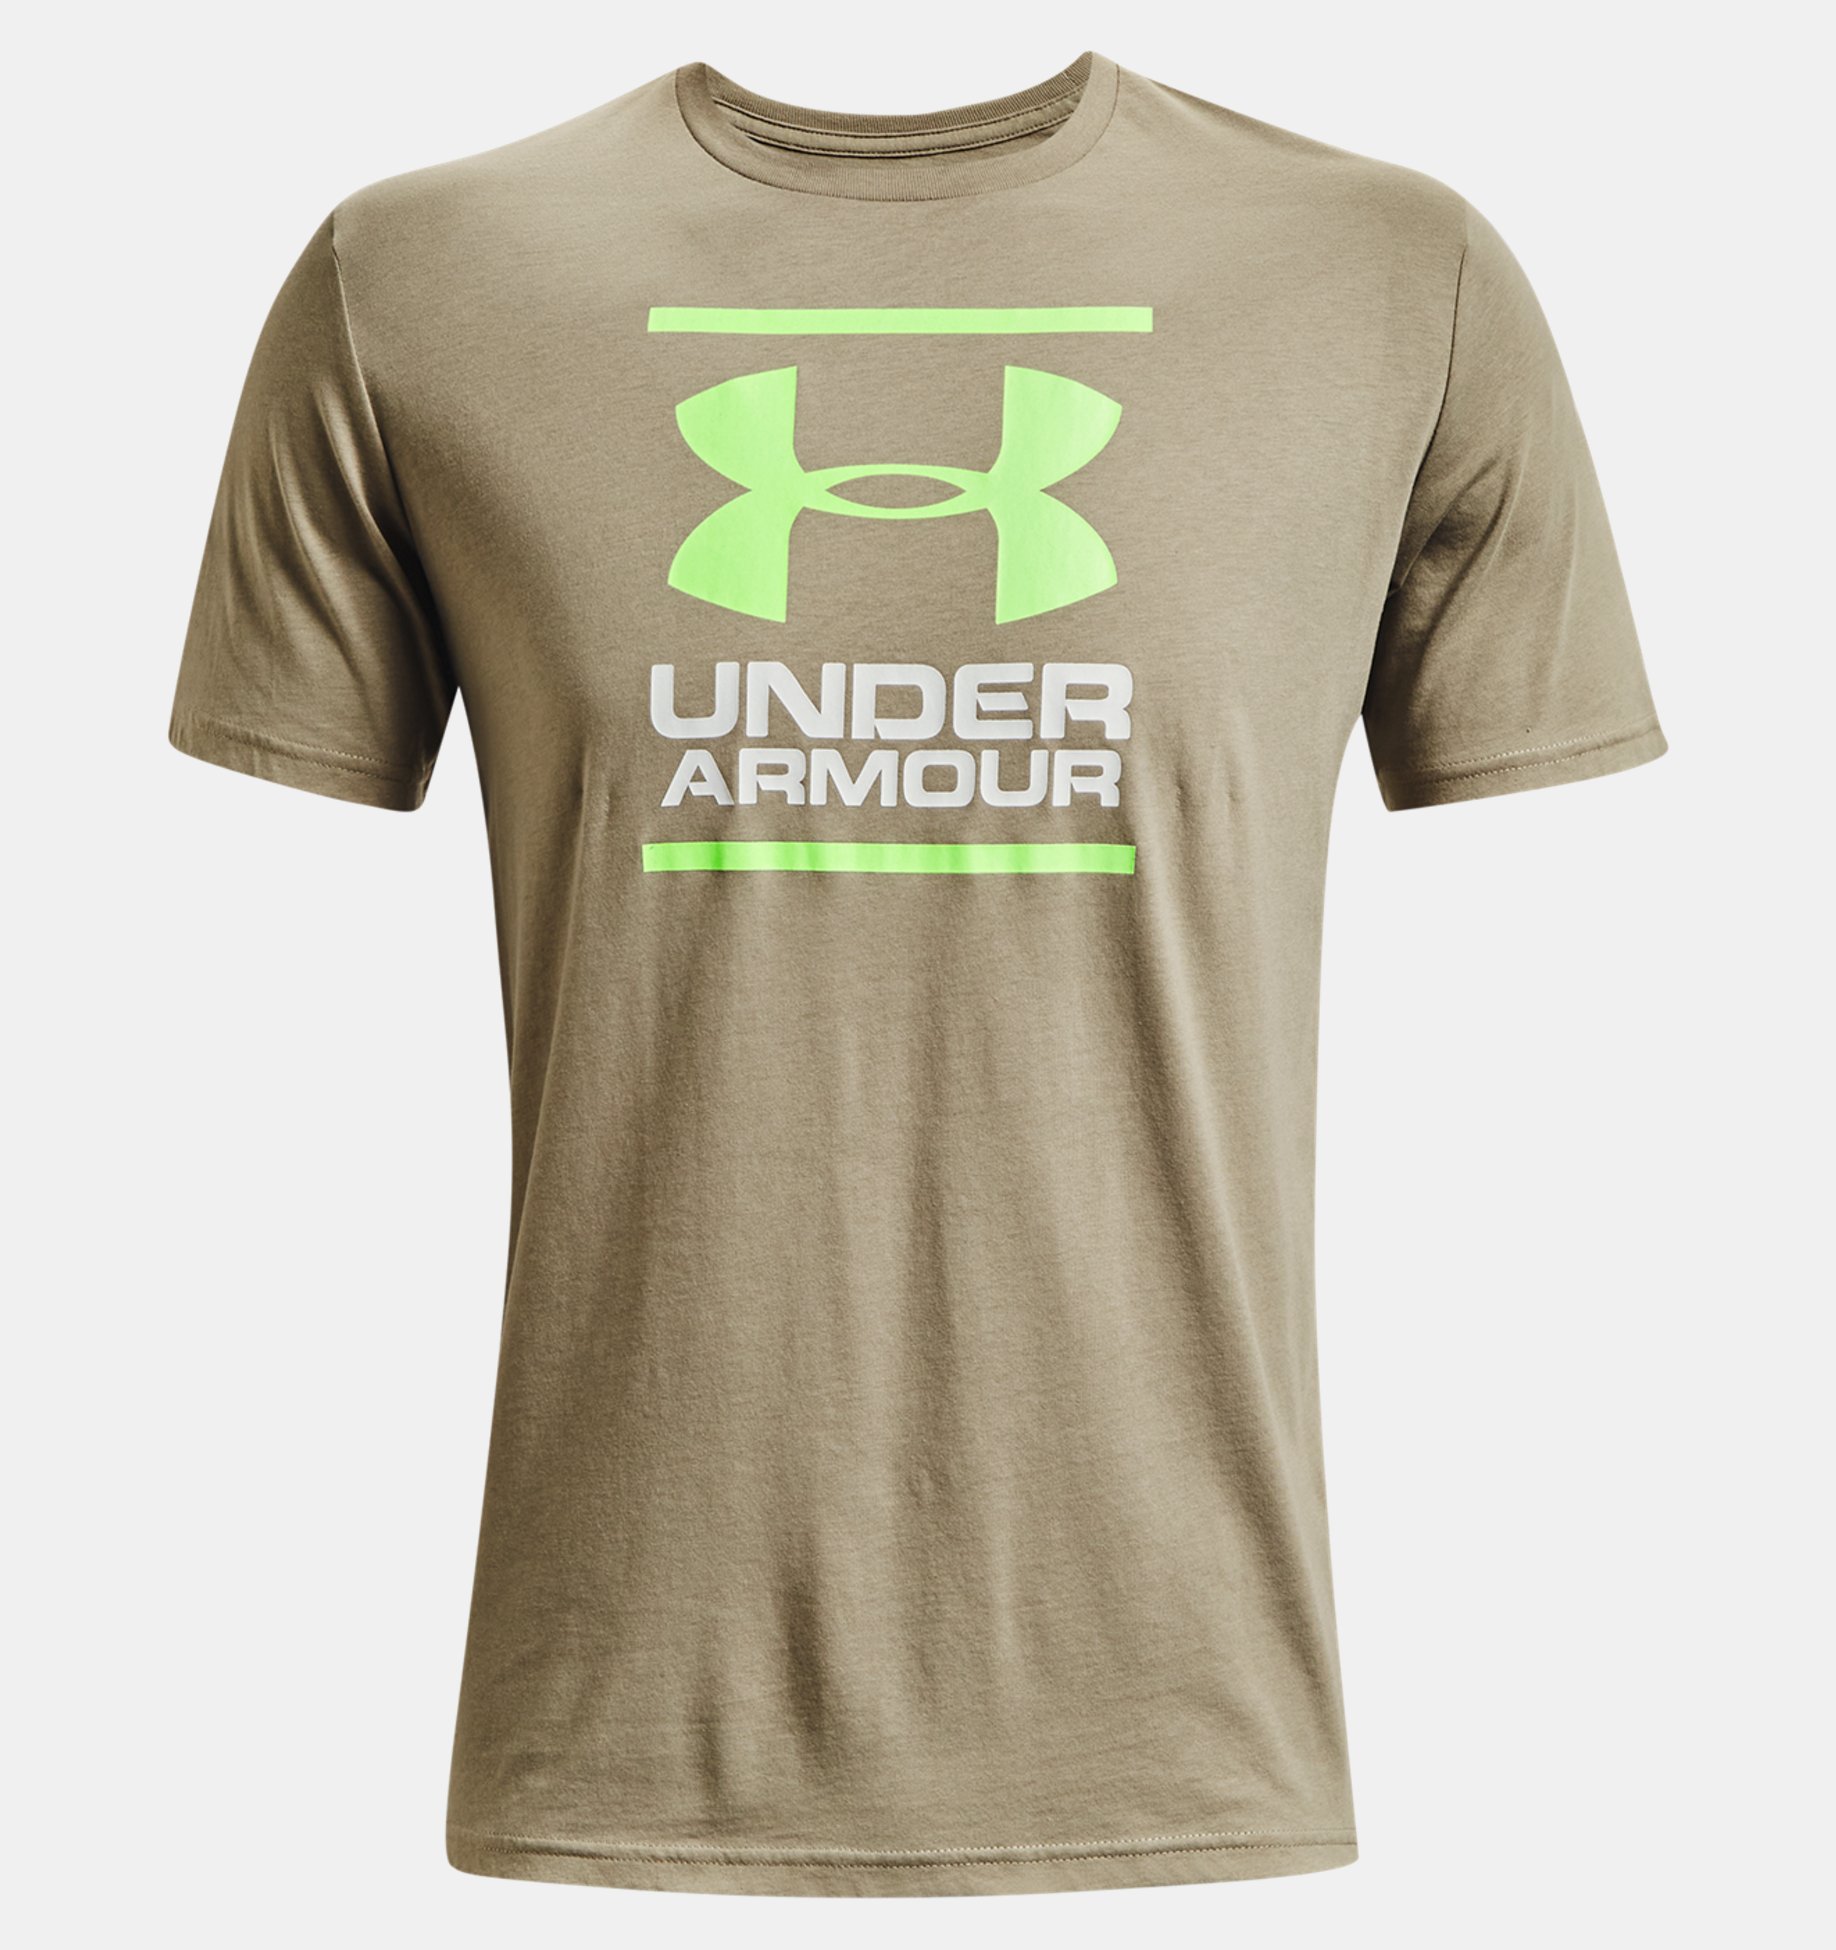 Under Armour GL Foundation short sleeve camisa señores t-shirt red 1326849-600 